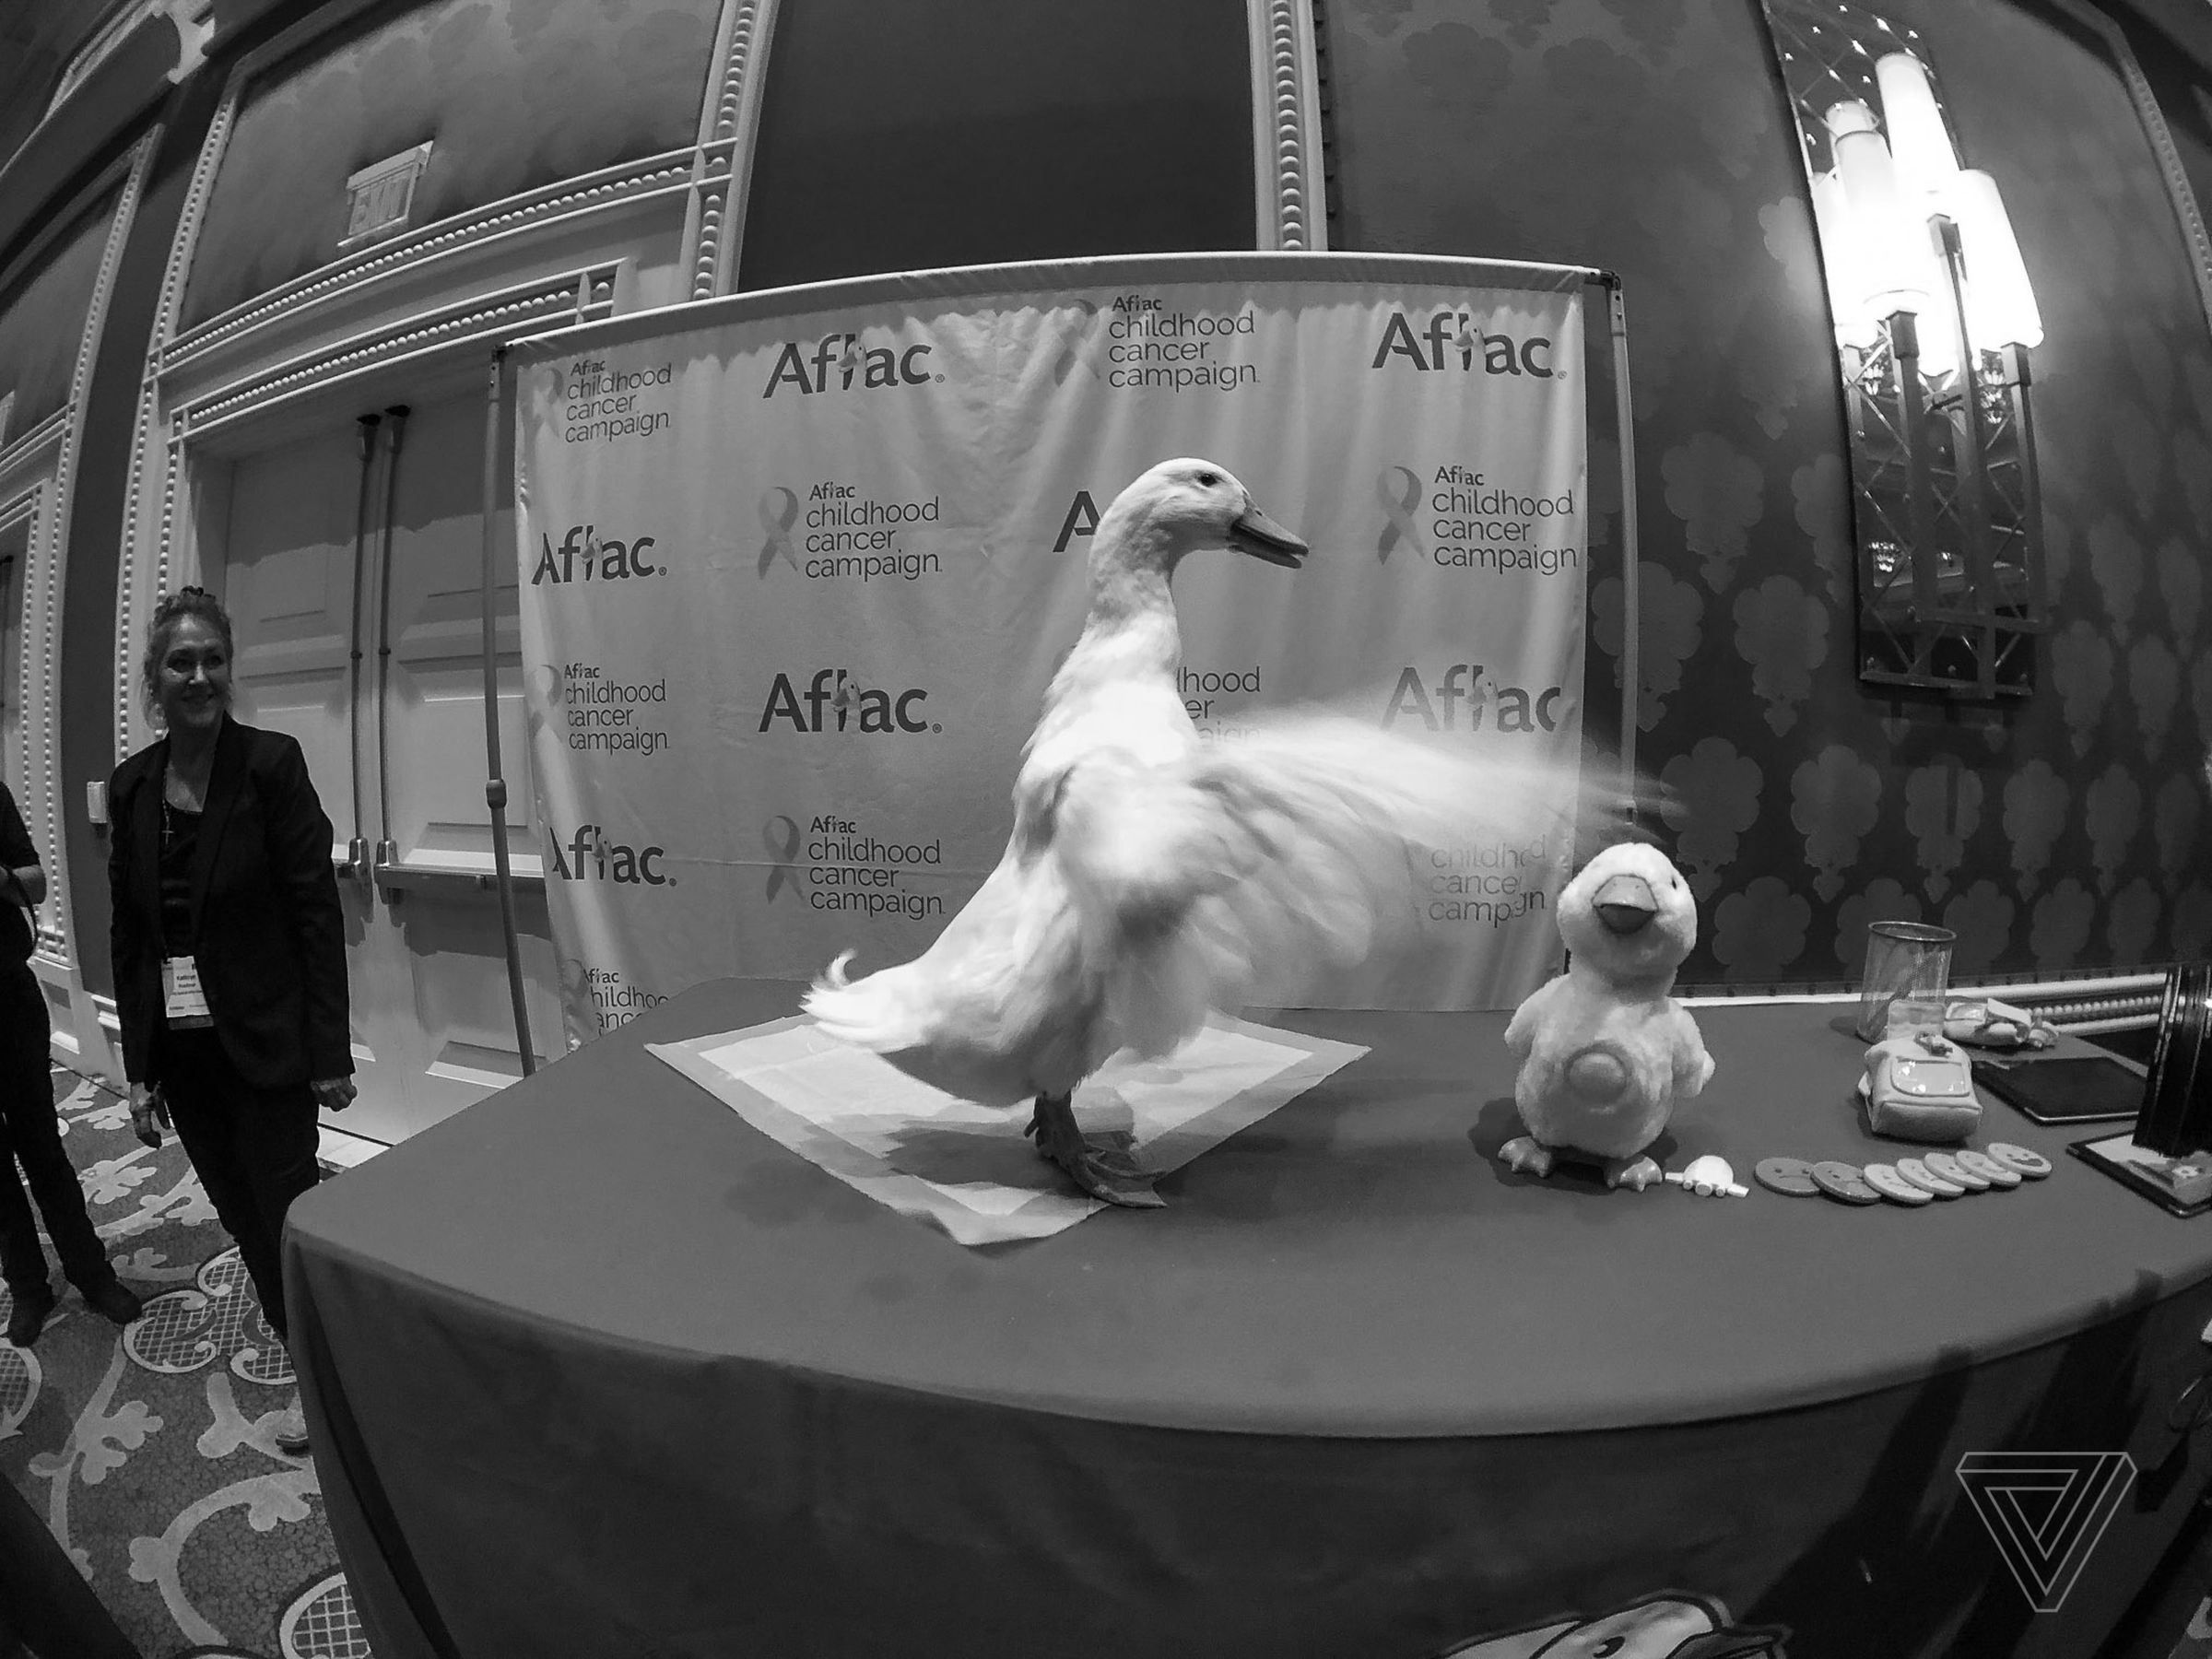 And a final reminder of what CES is all about: ducks and robots